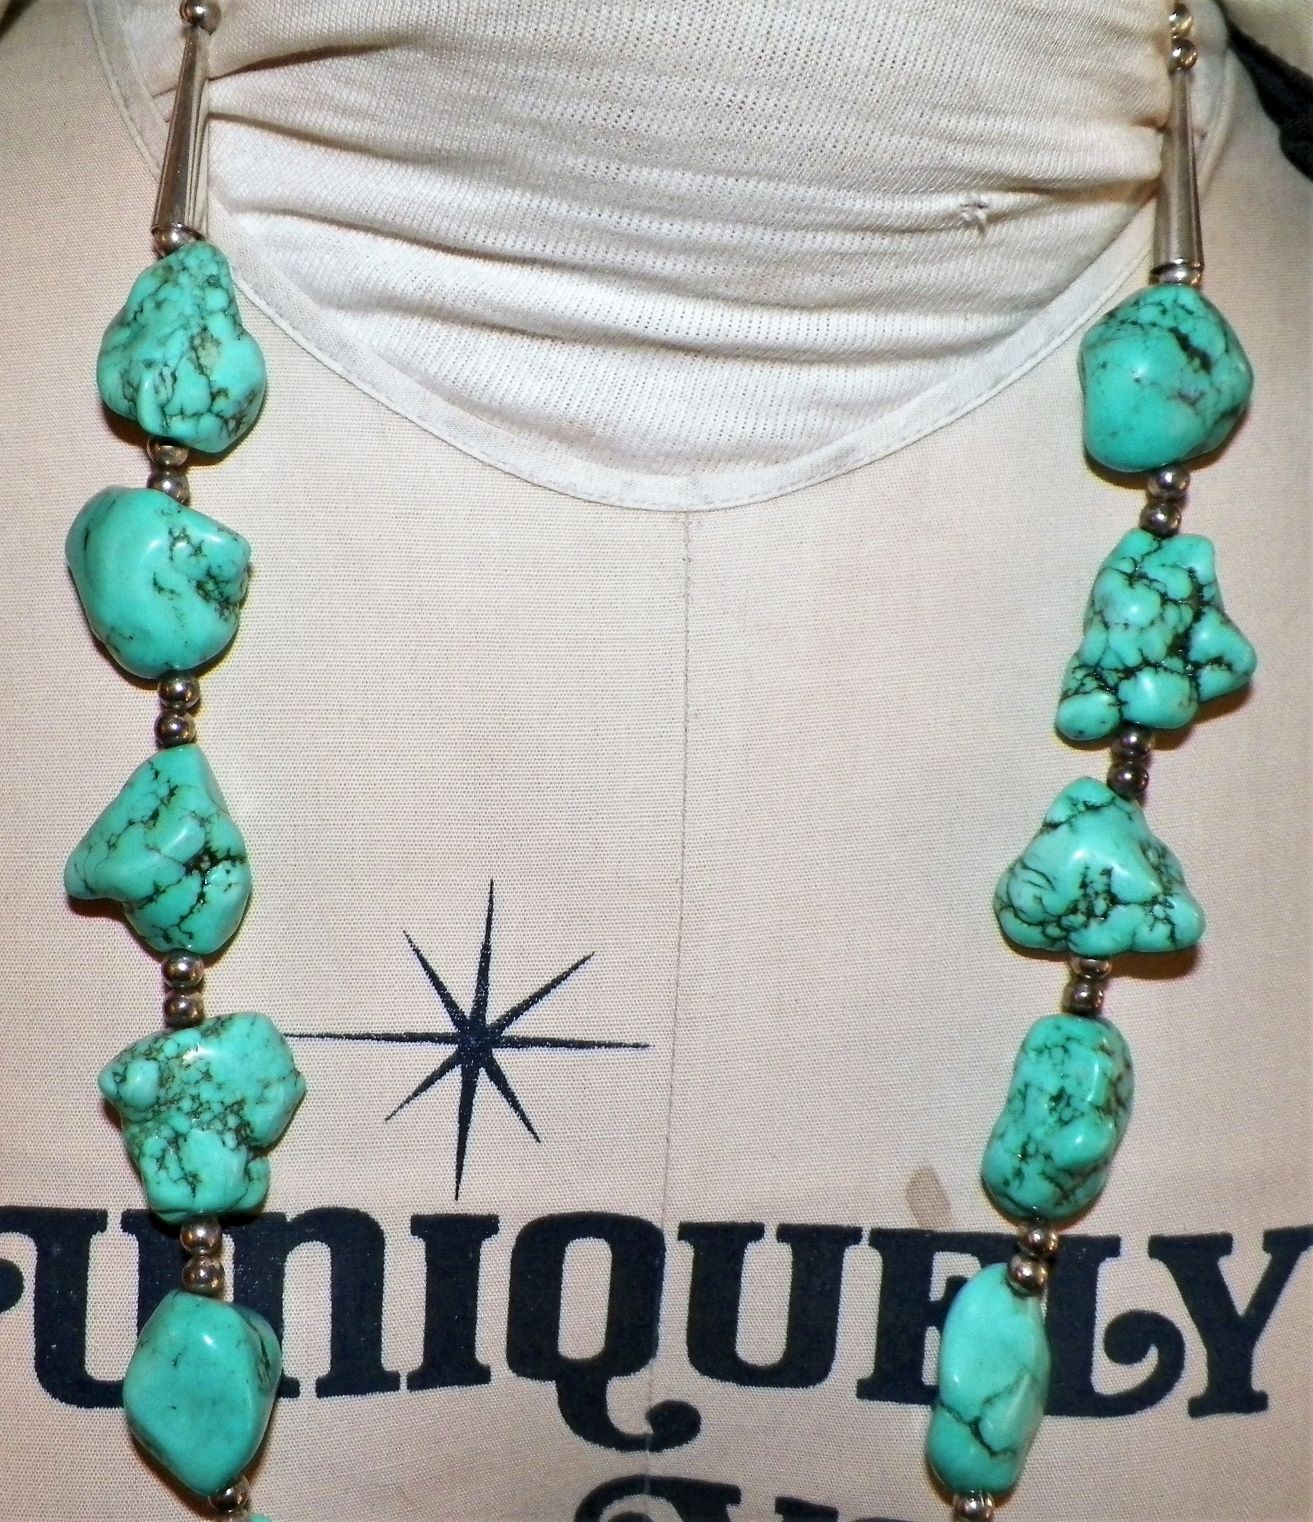 JEWELRY NECKLACE TURQUOISE CHUNKY 2AA.JPG